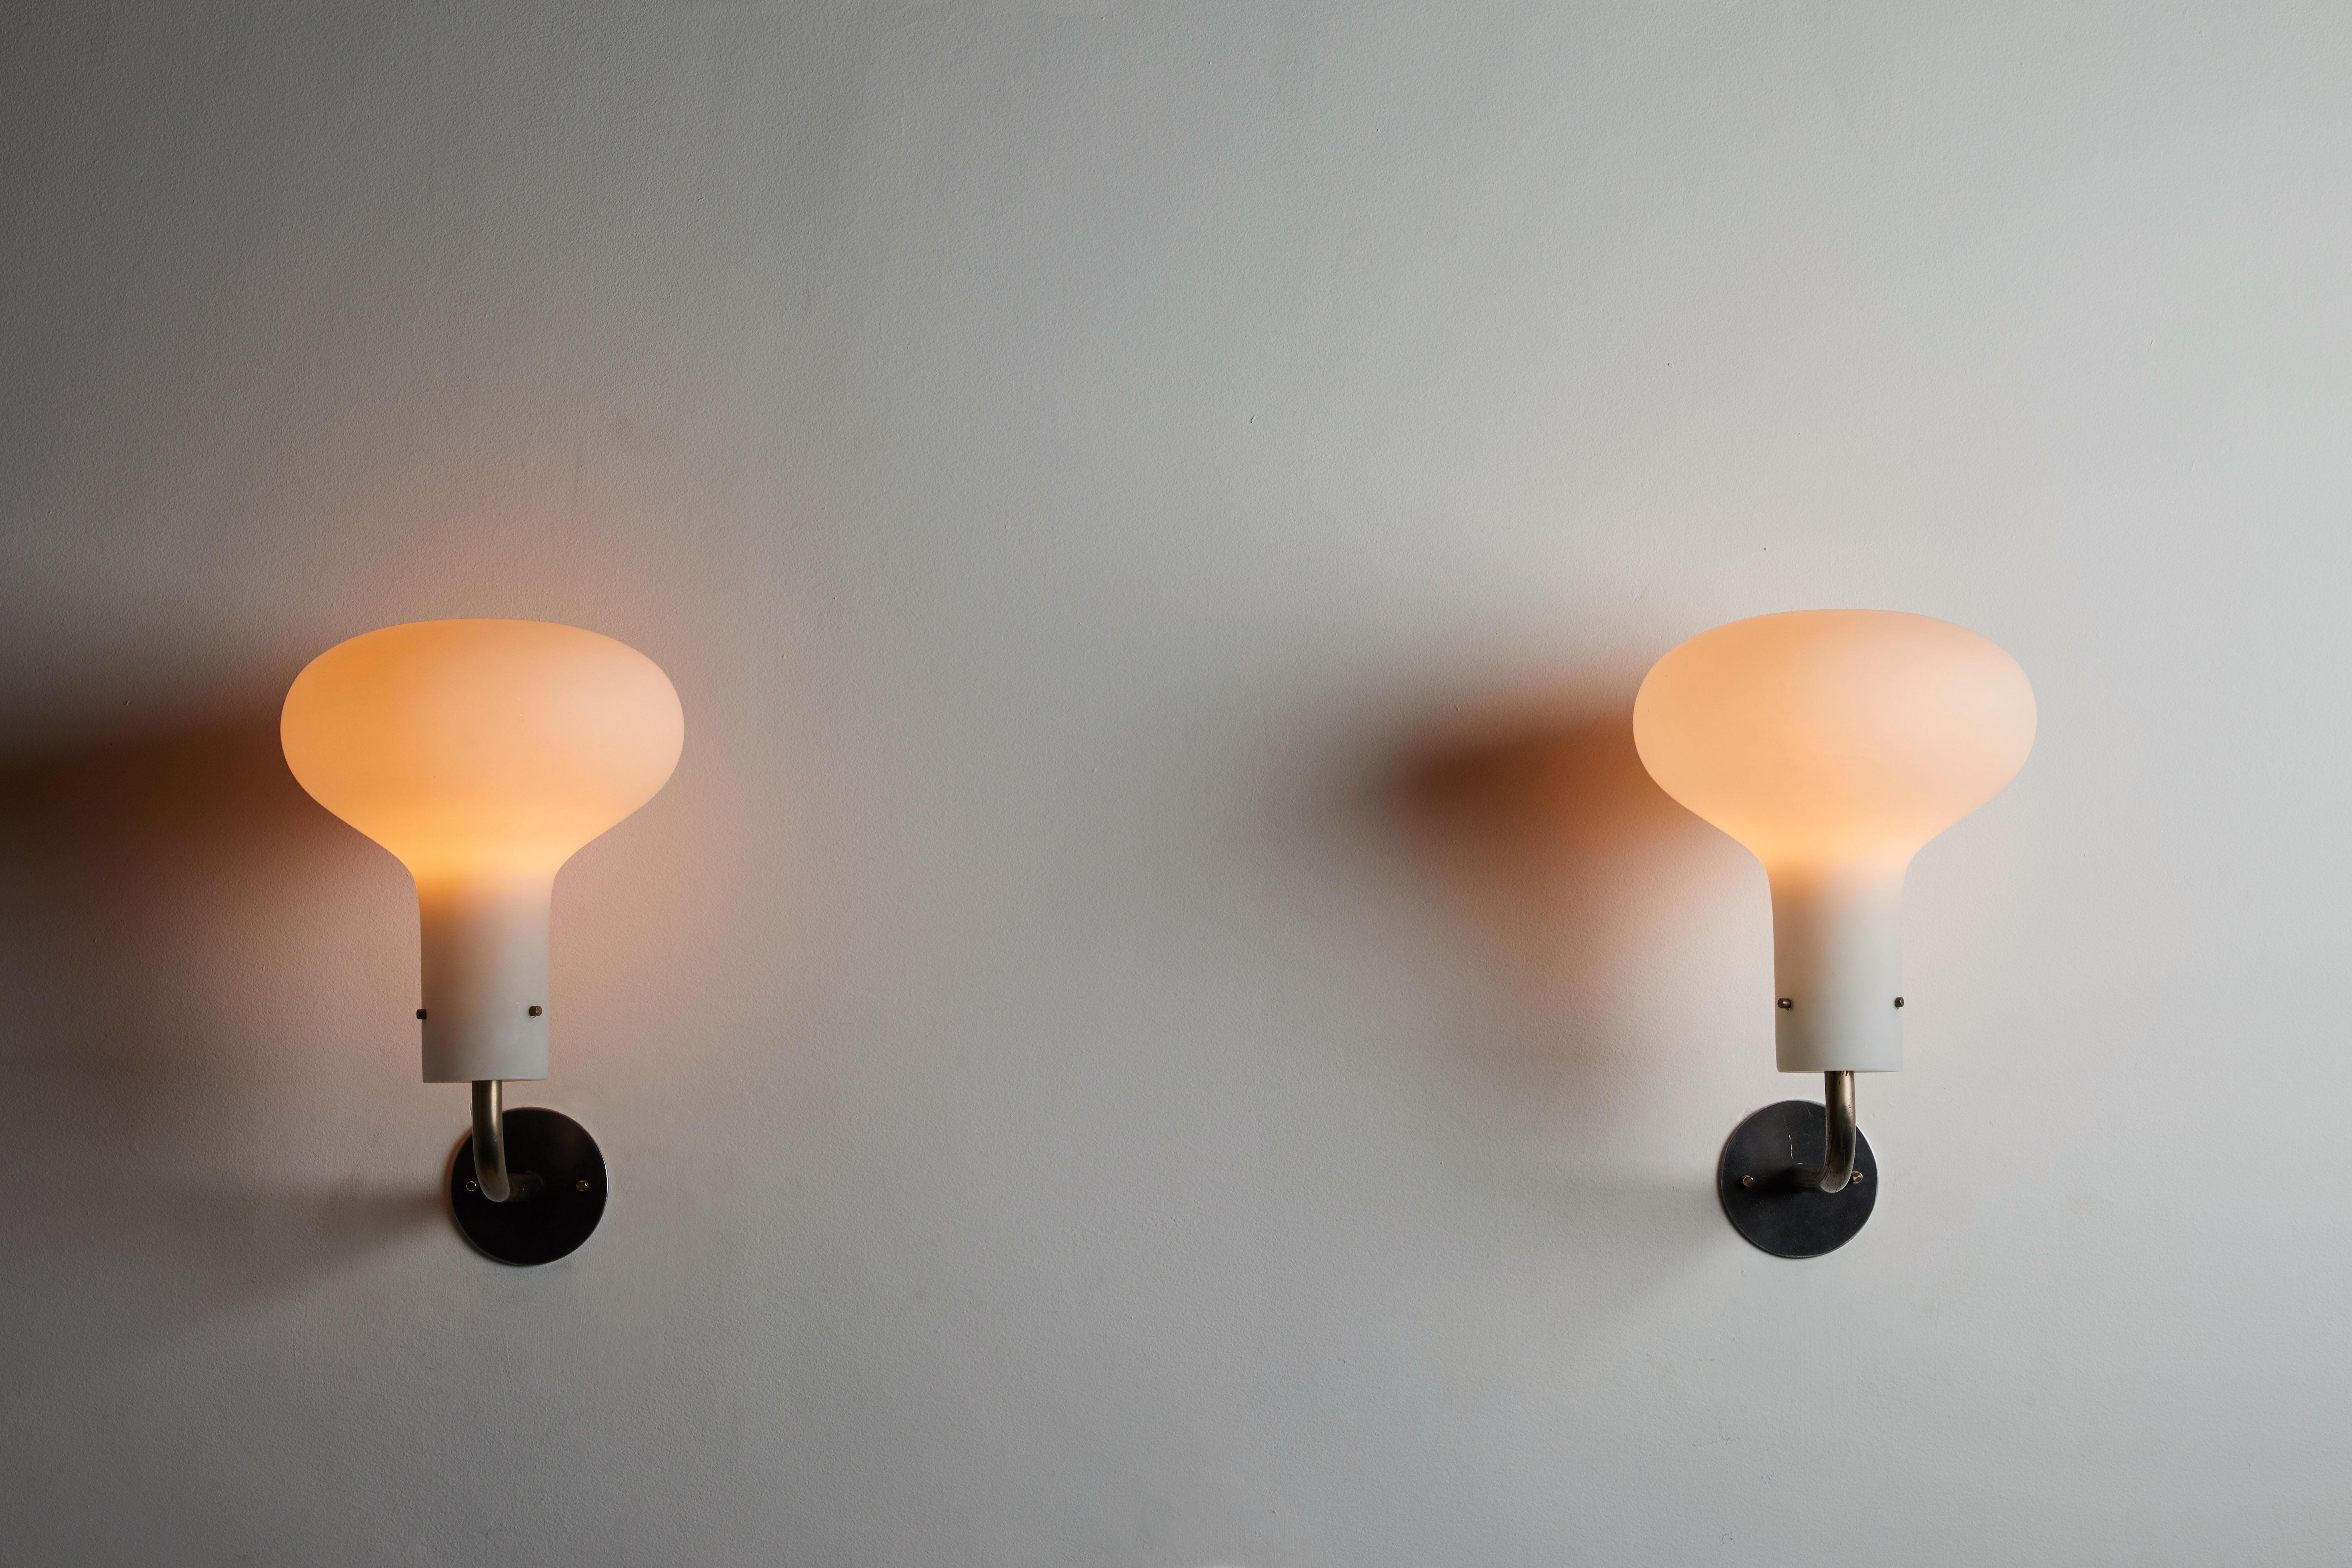 Two Model Lp12 Galleria sconces by Ignazio Gardella for Azucena. Designed and manufactured in Italy, 1958. Brushed satin glass diffusers with patinated brass hardware. Each light takes one E27 100w maximum bulb. Retains original manufacturers stamp.